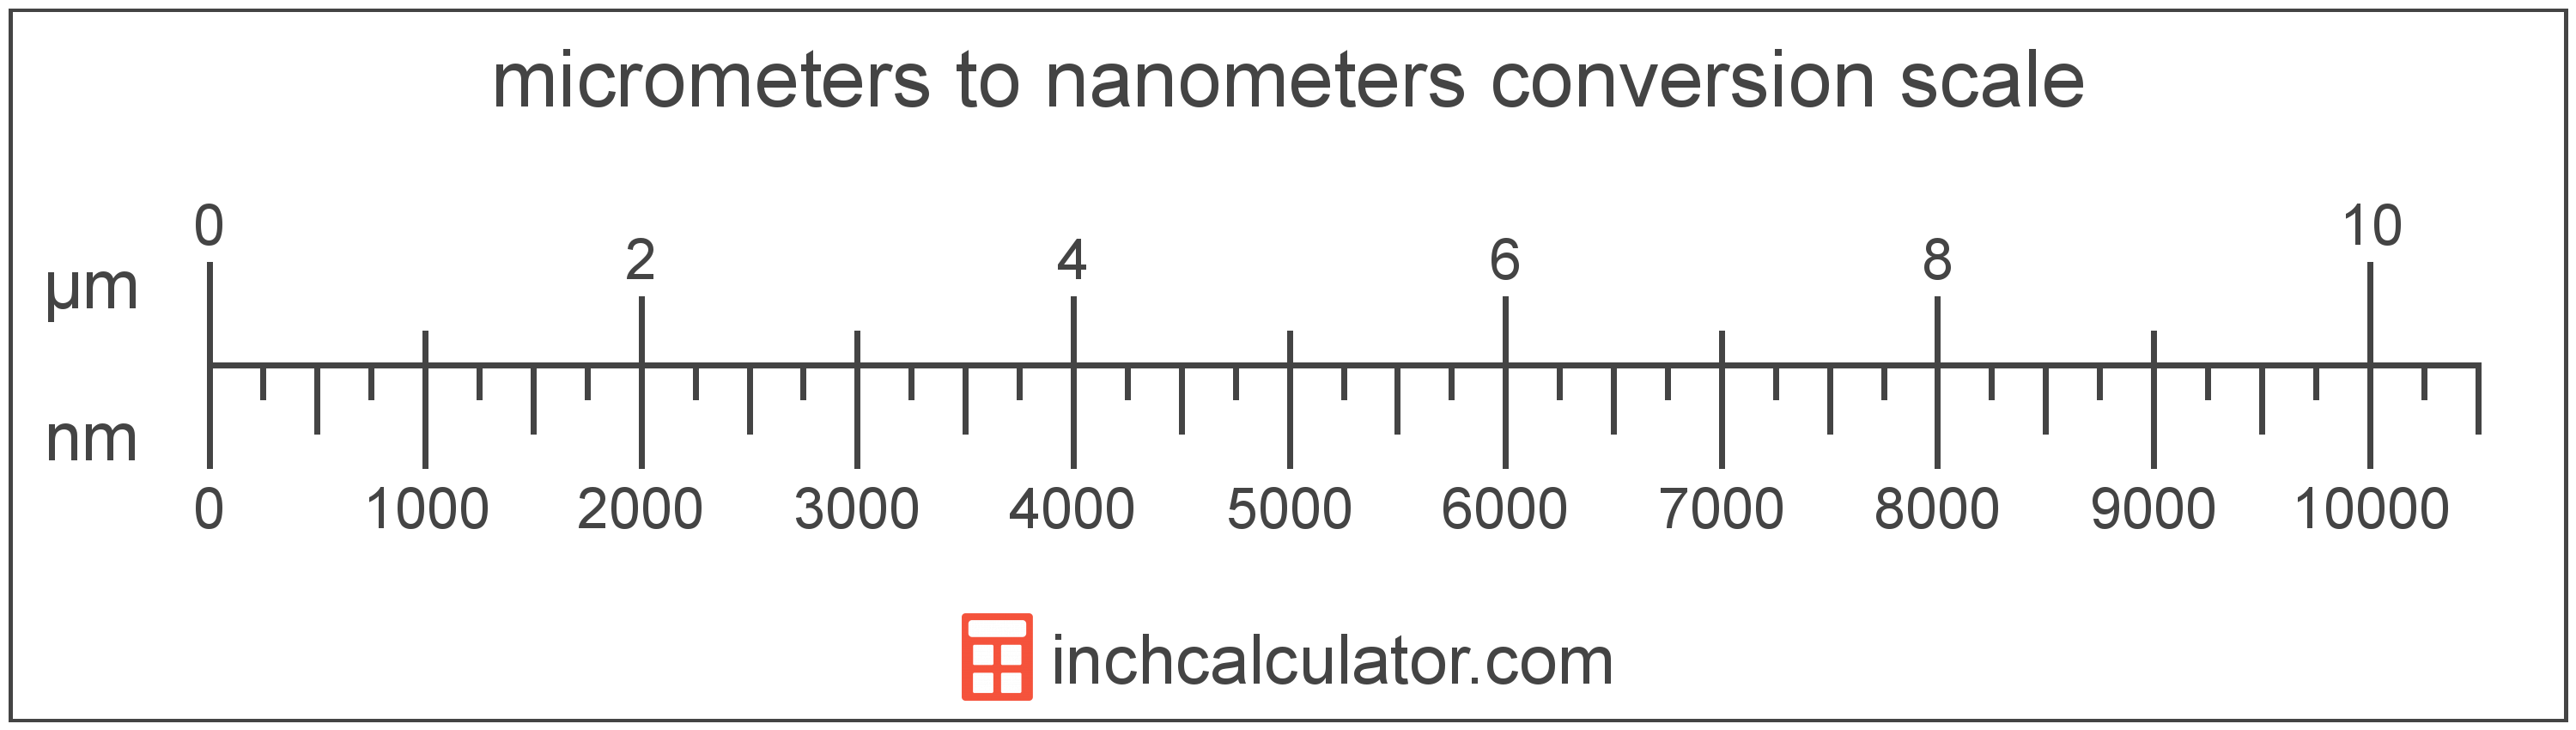 conversion scale showing micrometers and equivalent nanometers length values